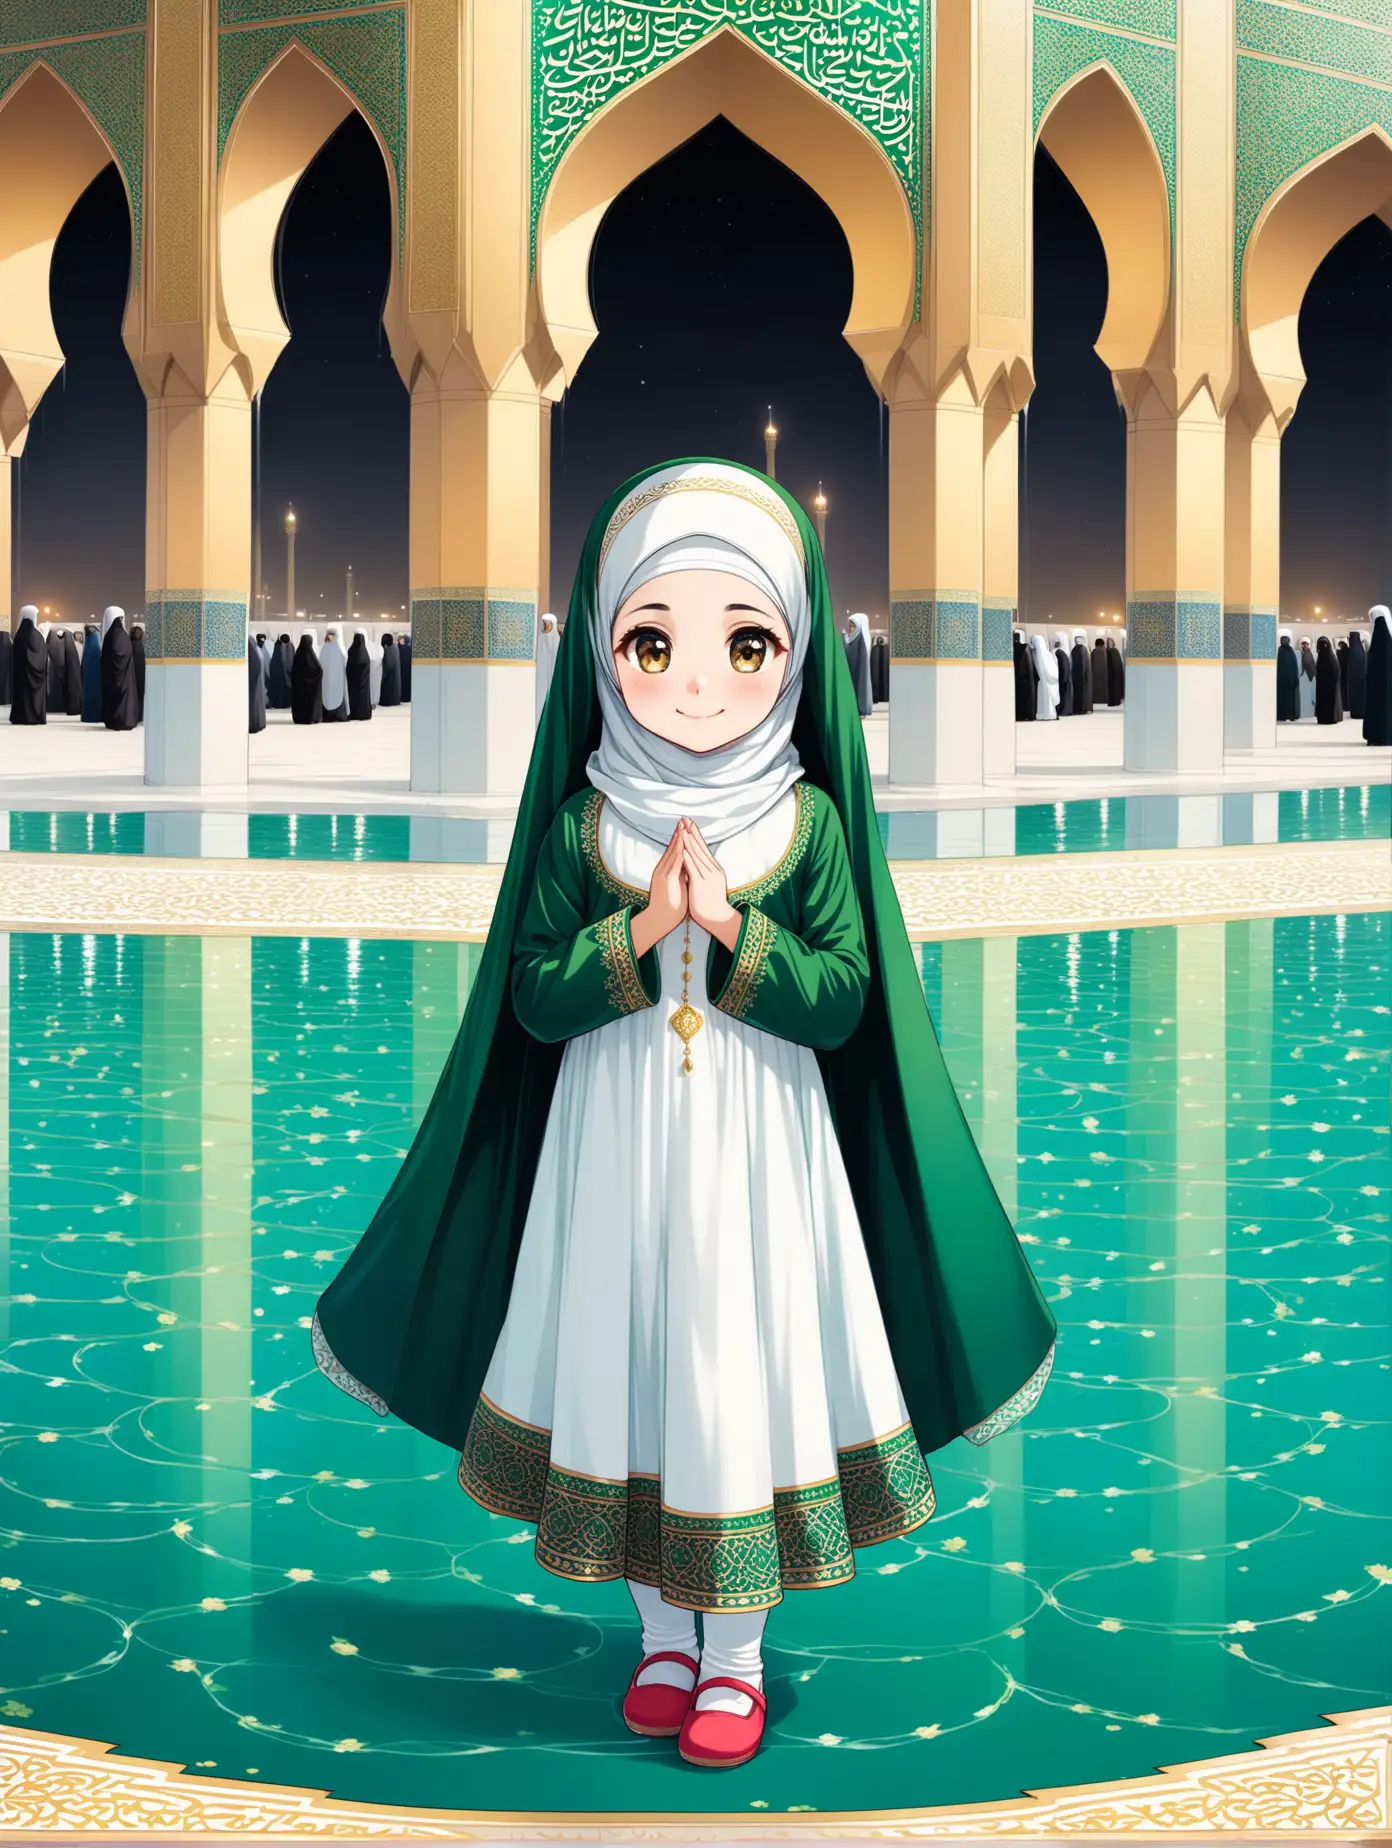 Character Persian little girl(full height, proudly, Muslim, with emphasis no hair nor neck out of veil(Hijab), smaller eyes, bigger nose, white skin, cute, smiling, wearing socks, clothes full of Persian designs).

Atmosphere shrine of Imam Reza Yard, water, nobody.